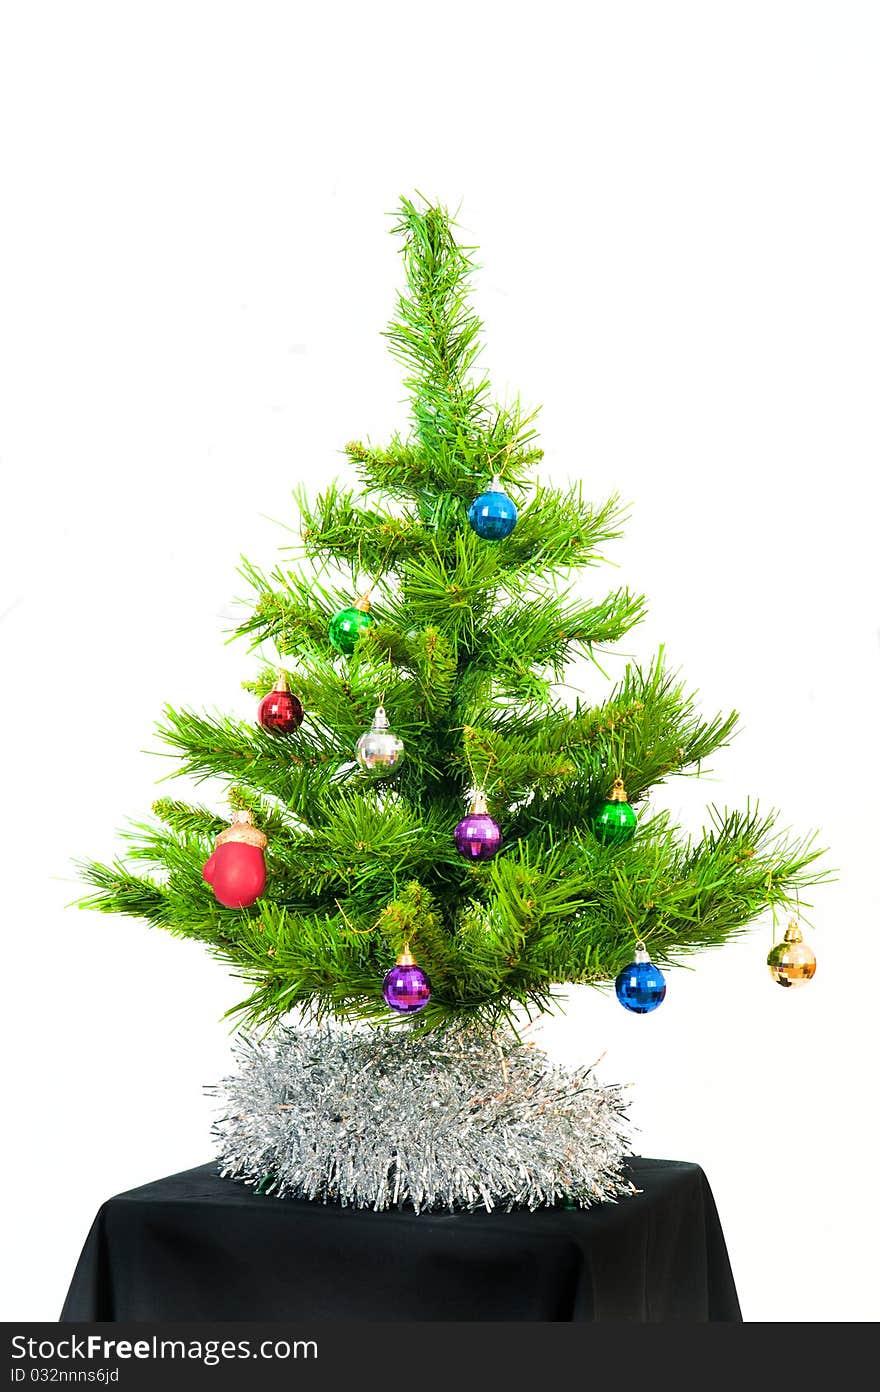 Image of Christmas fir tree decorated with color toy balls